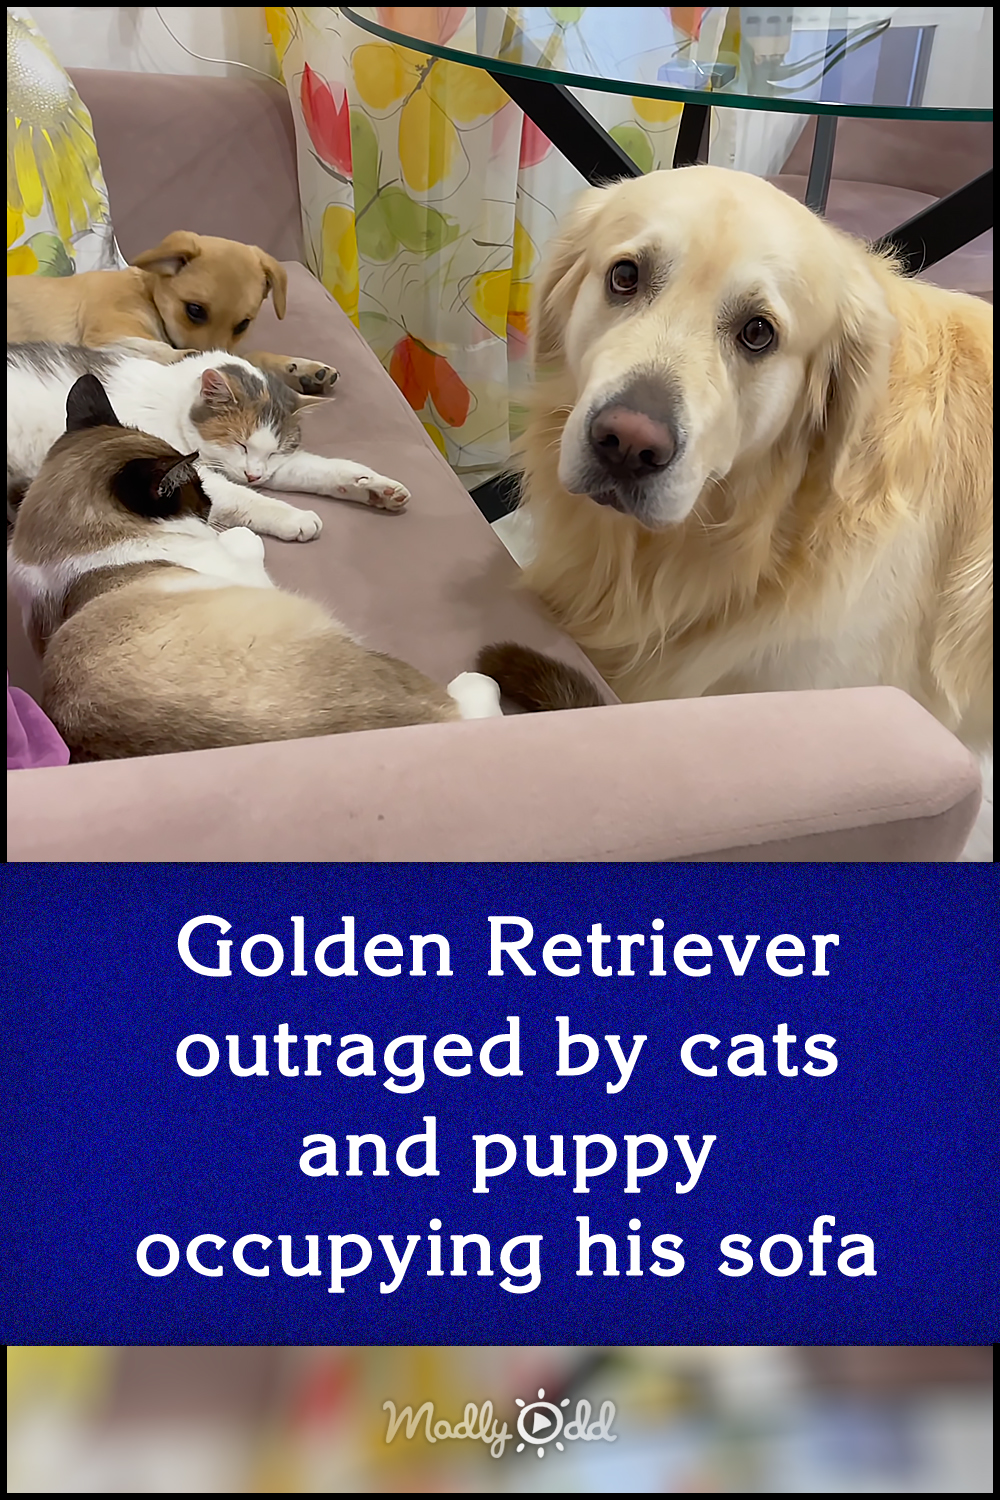 Golden Retriever outraged by cats and puppy occupying his sofa